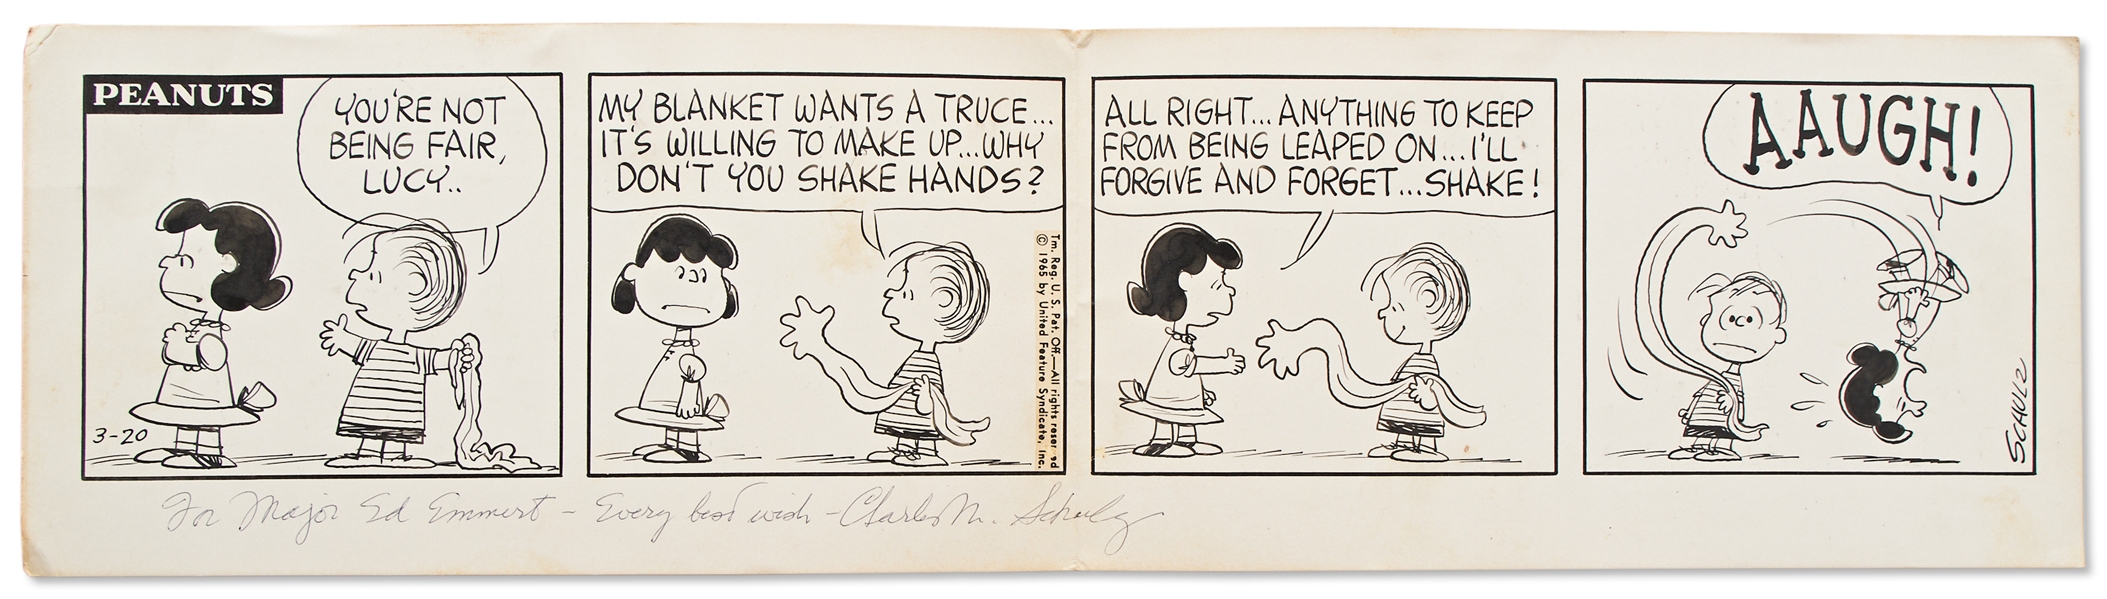 Charles Schulz Hand-Drawn ''Peanuts'' Comic Strip from 1965 -- Linus' Blanket Gets Revenge on Lucy